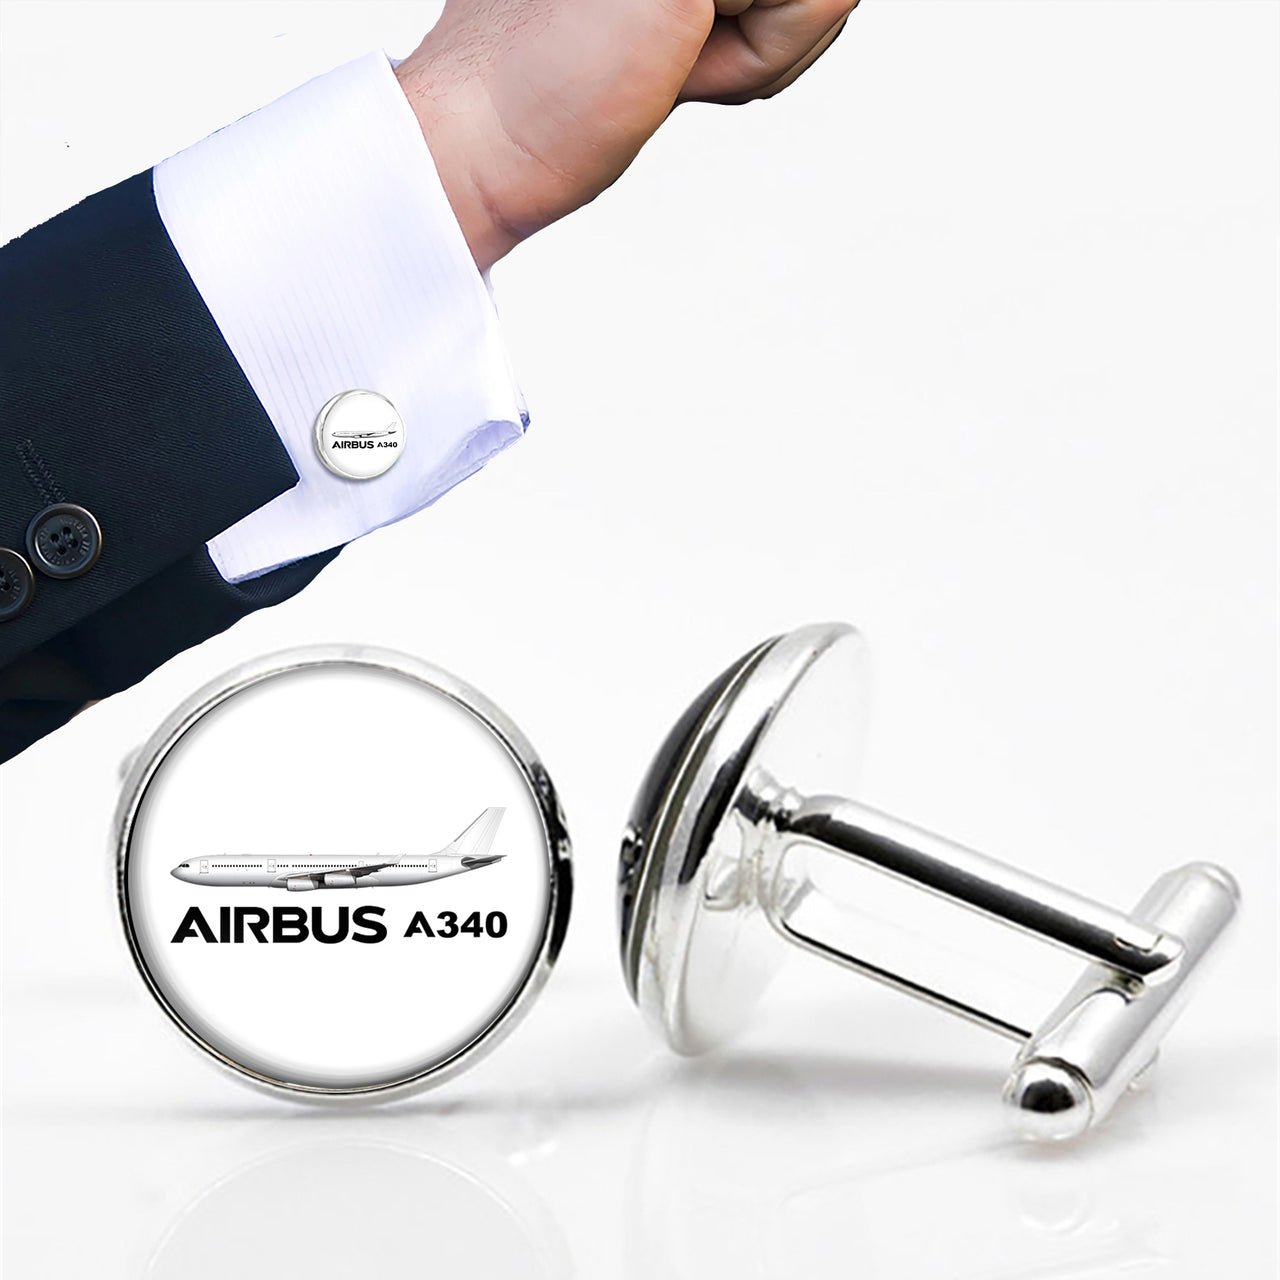 The Airbus A340 Designed Cuff Links